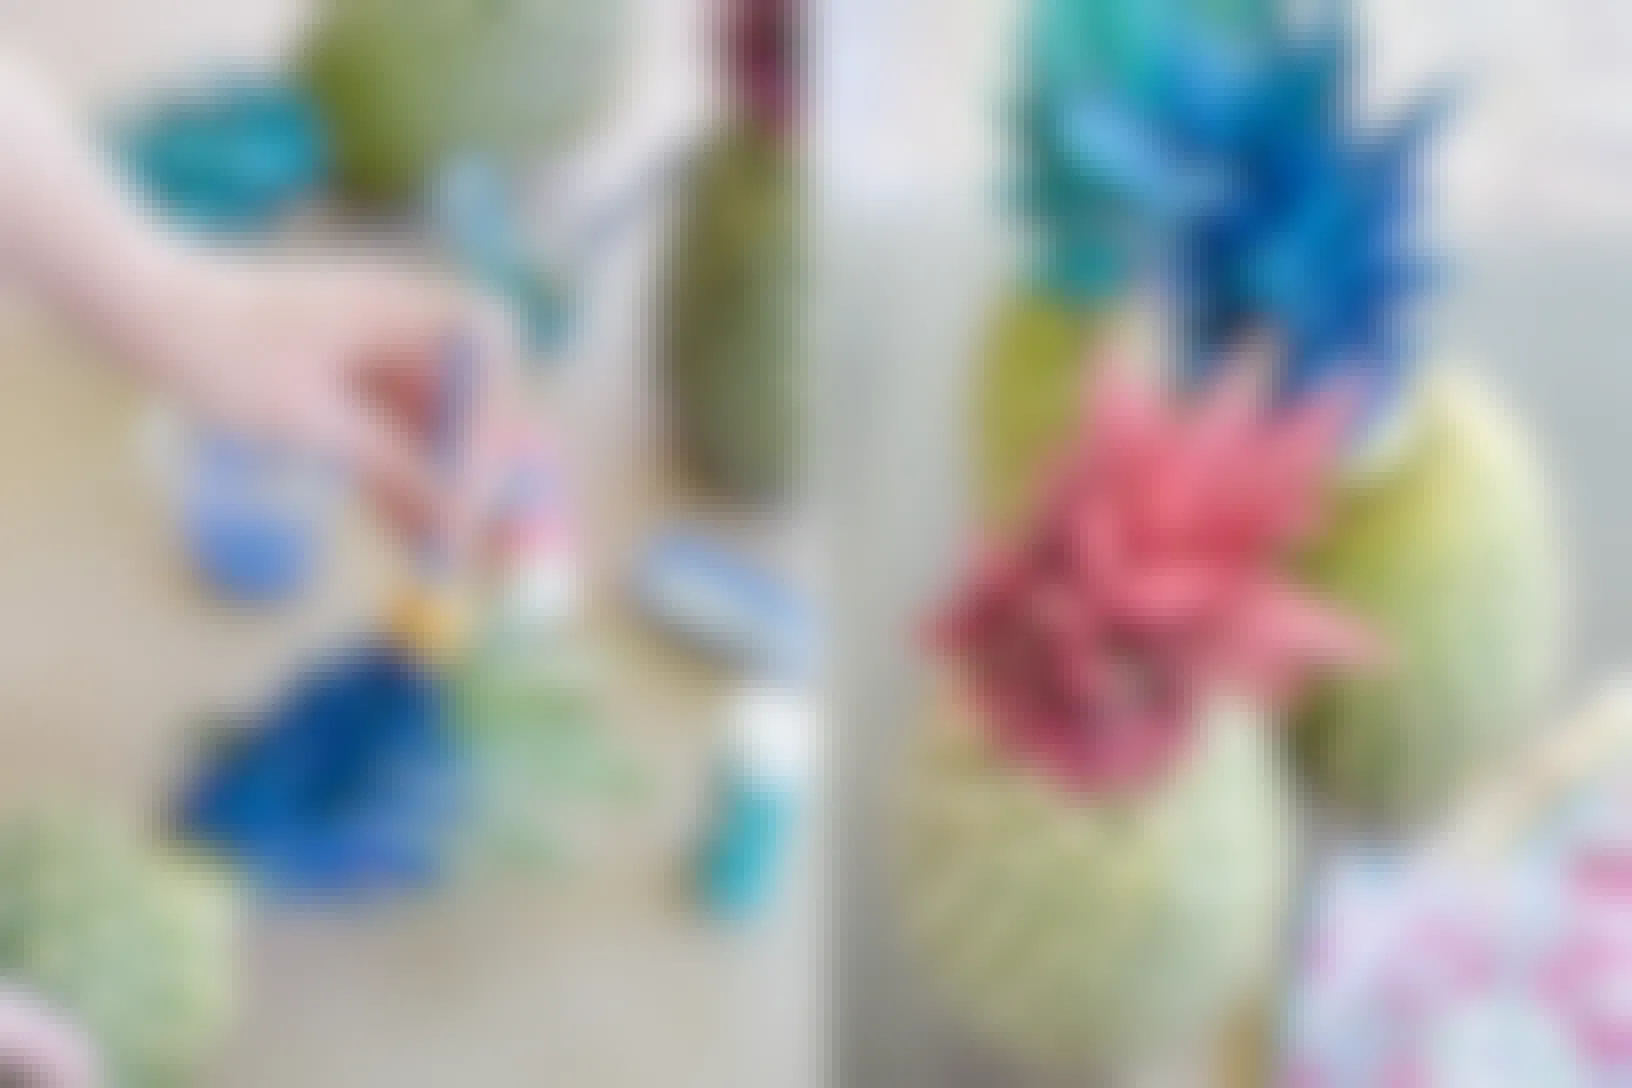 A person using acrylic paint to paint pineapple crowns next to some pineapples that have been painted pink and blue.